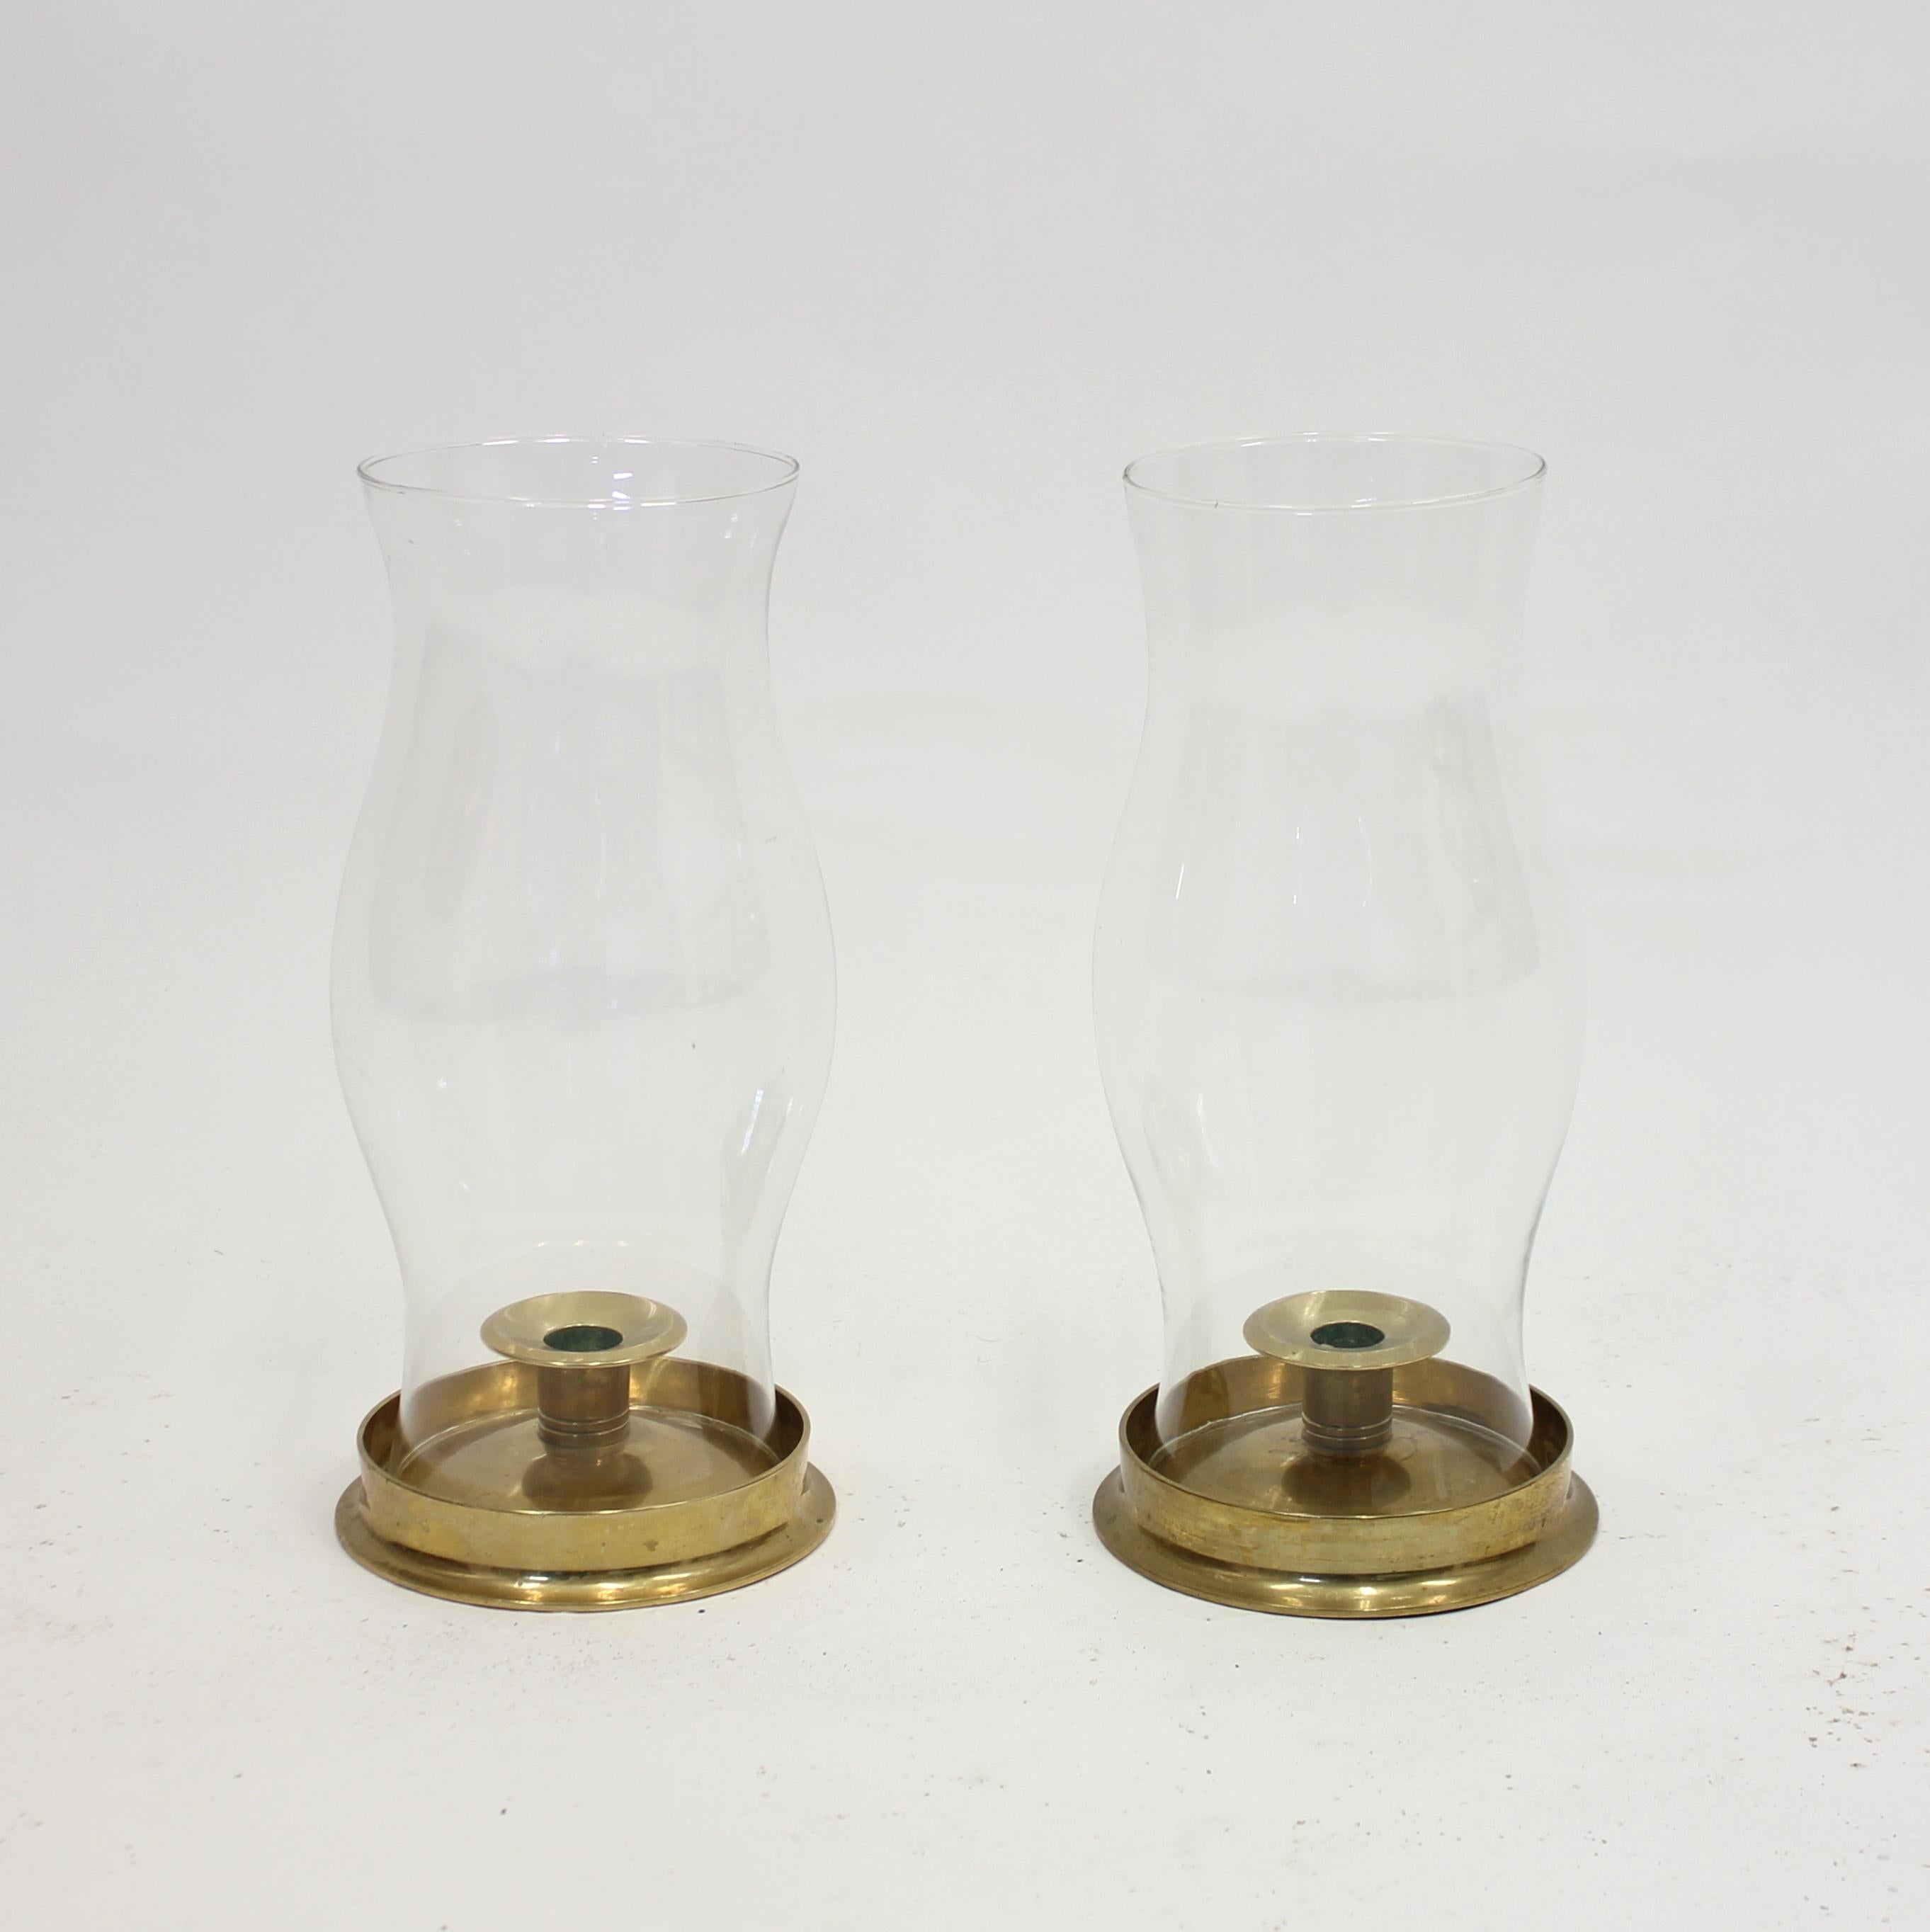 Pair of brass and glass storm lanterns or hurricane lamps / candle holders from ca 1970s. The glass is removable for an easy change of the candle light and has an organic shape that is a bit broader in the middle. Very good vintage condition with